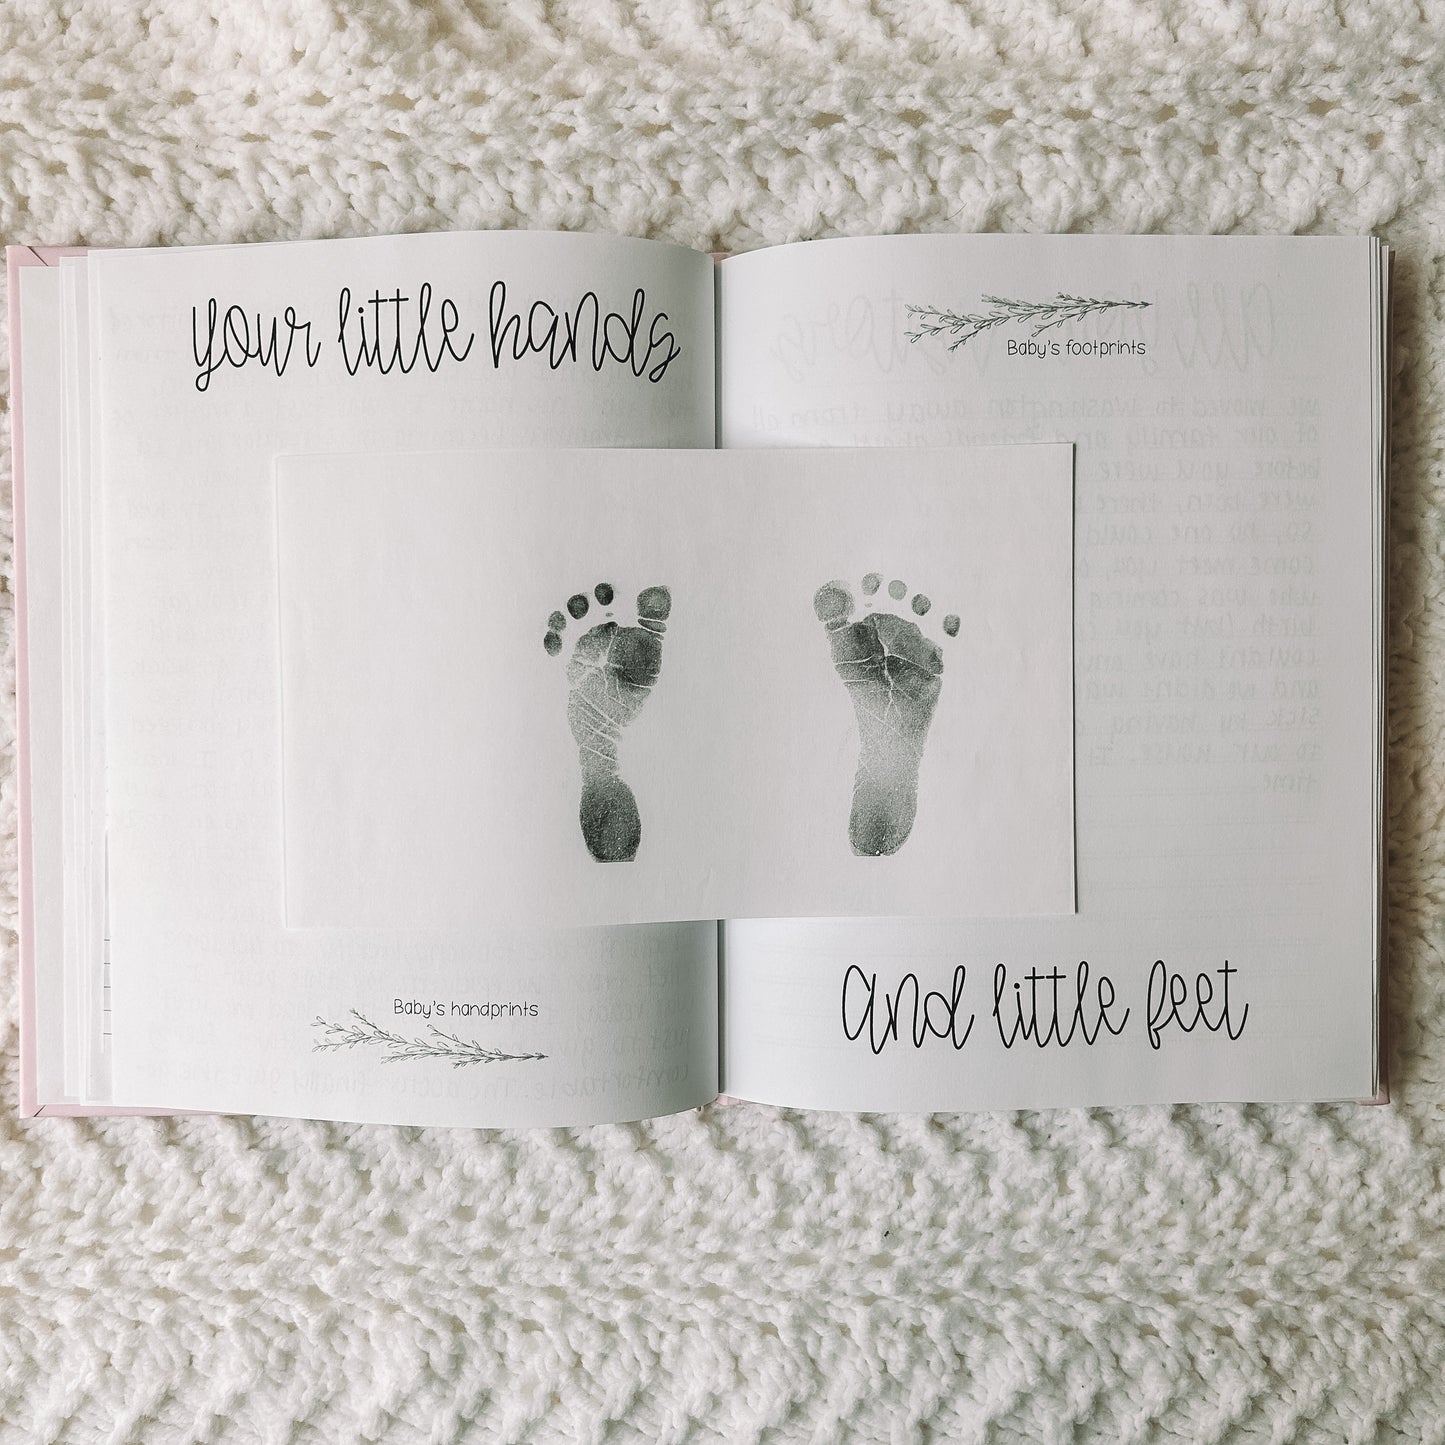 Two page spread for baby handprints and footprints.